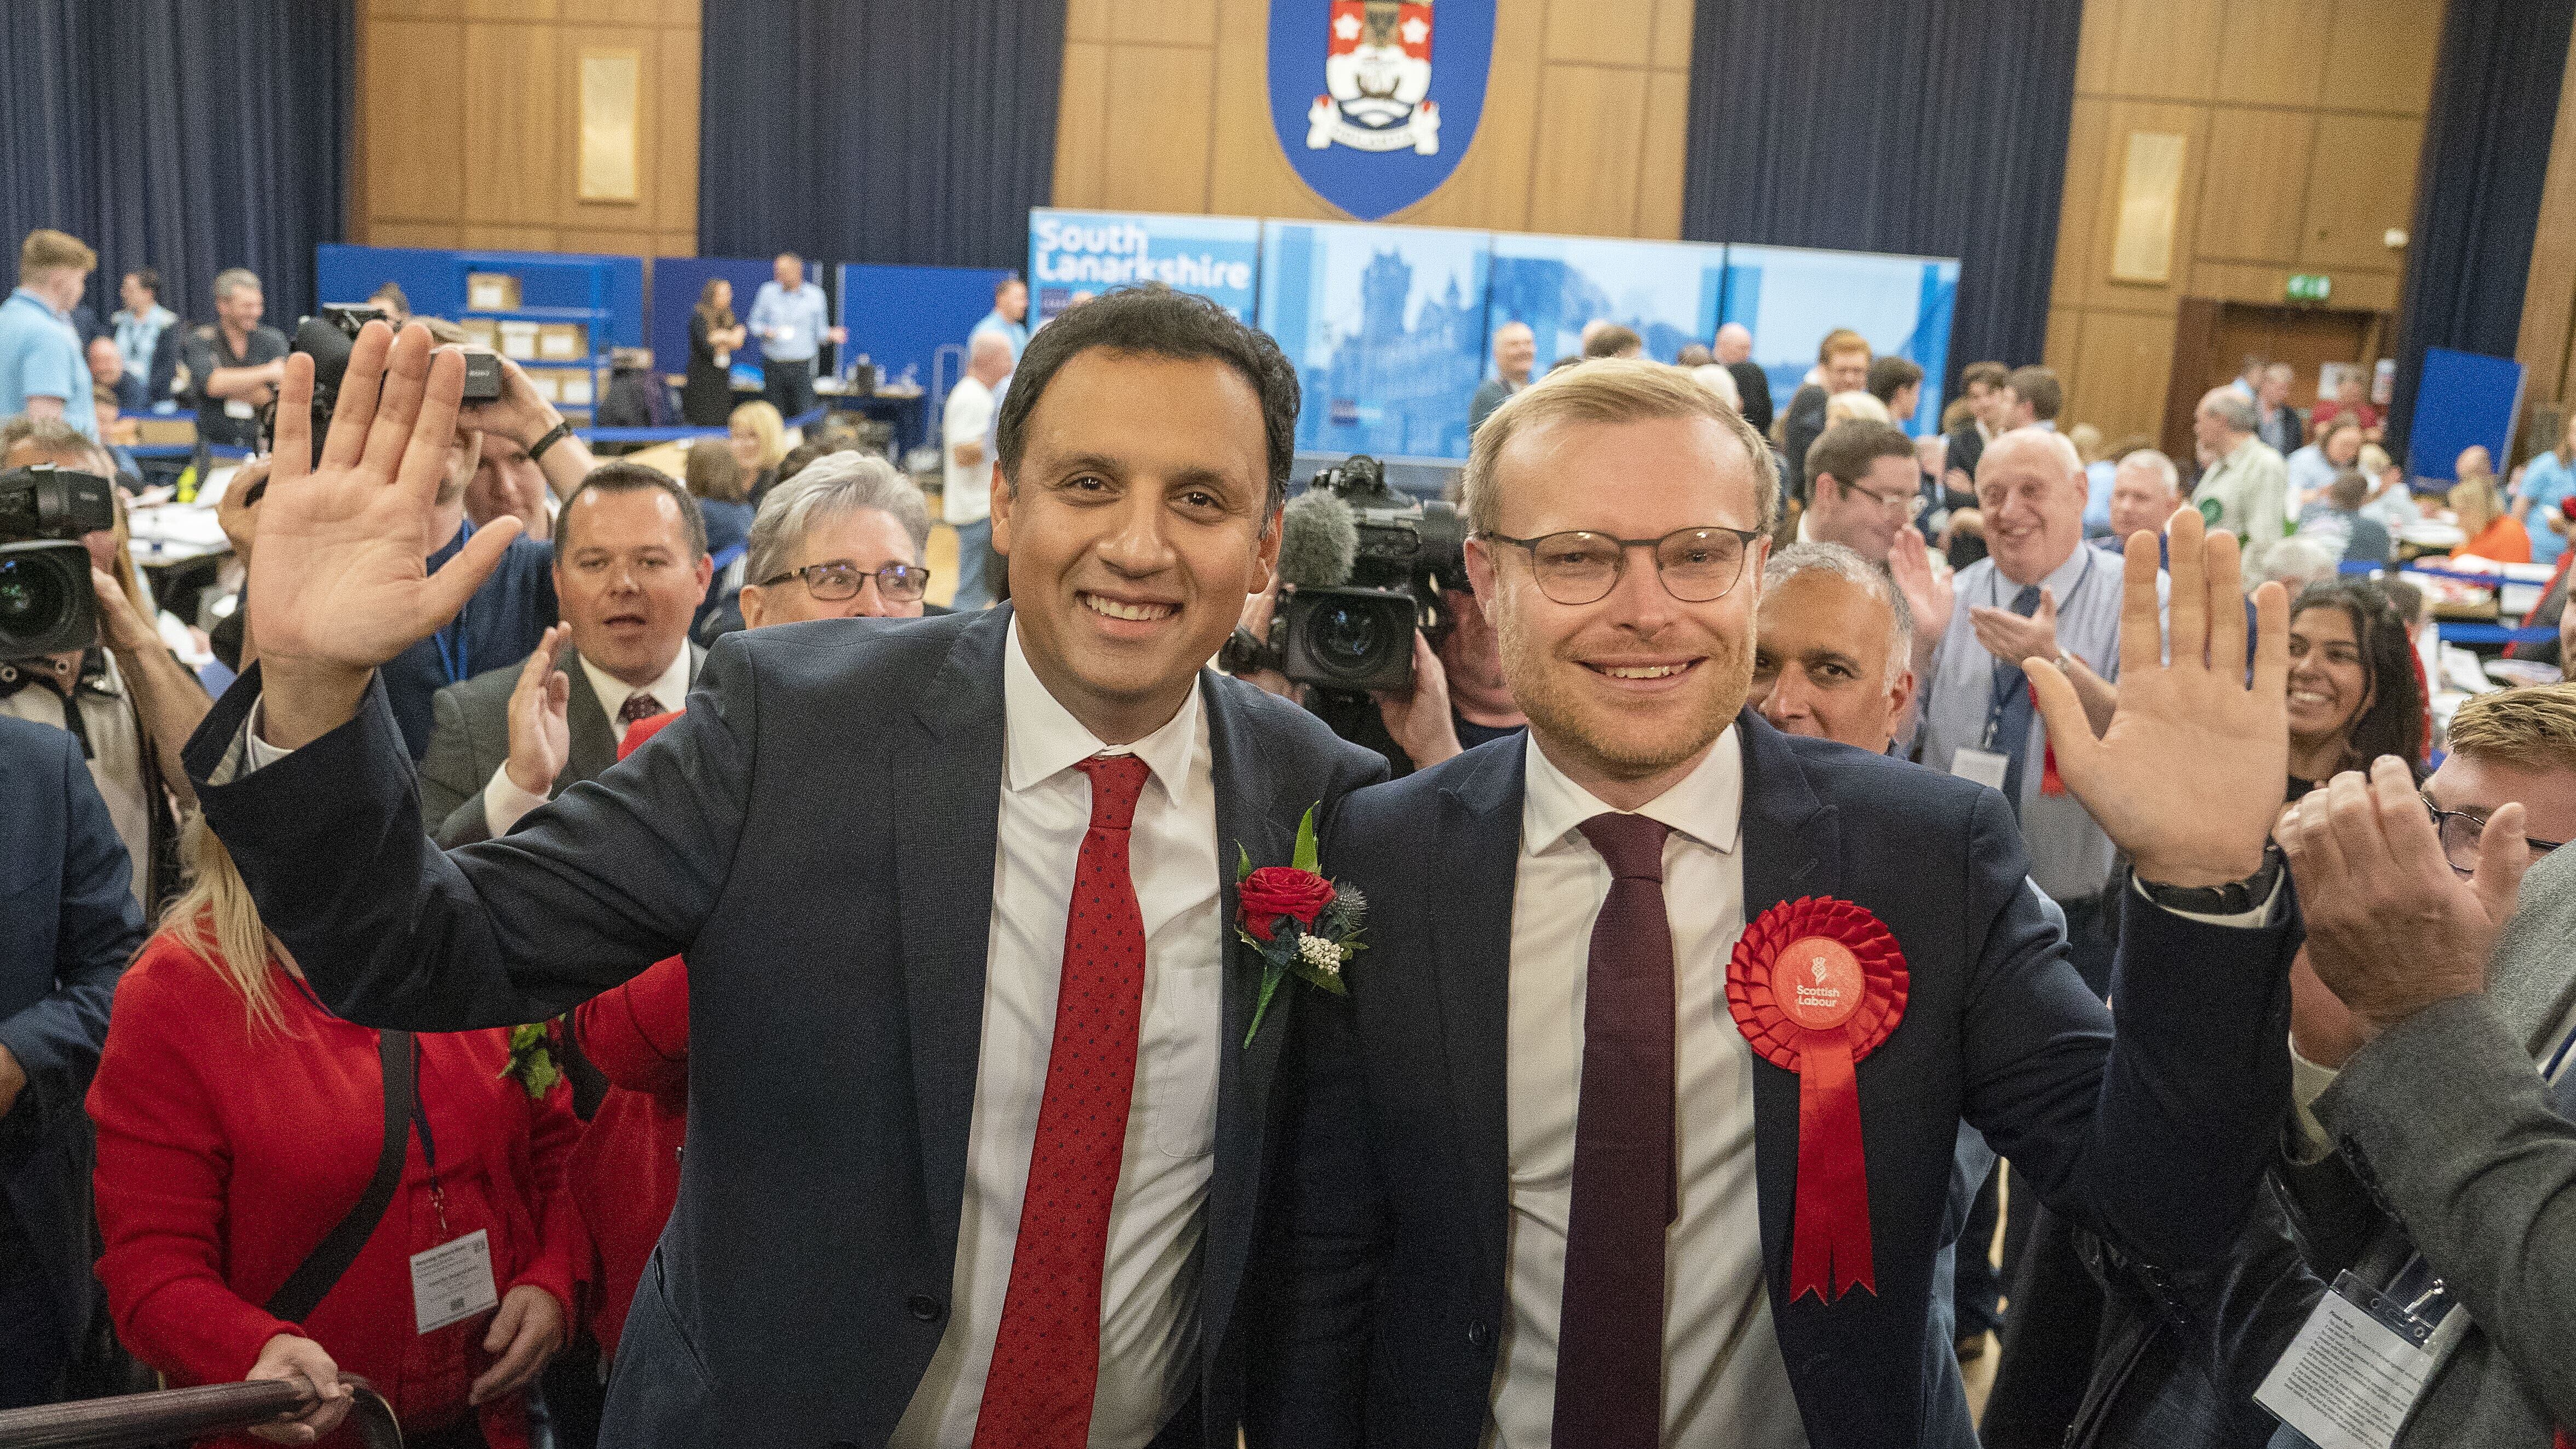 Scottish Labour leader Anas Sarwar celebrates with Michael Shanks after the party won the Rutherglen and Hamilton West byelection. (Jane Barlow/PA)